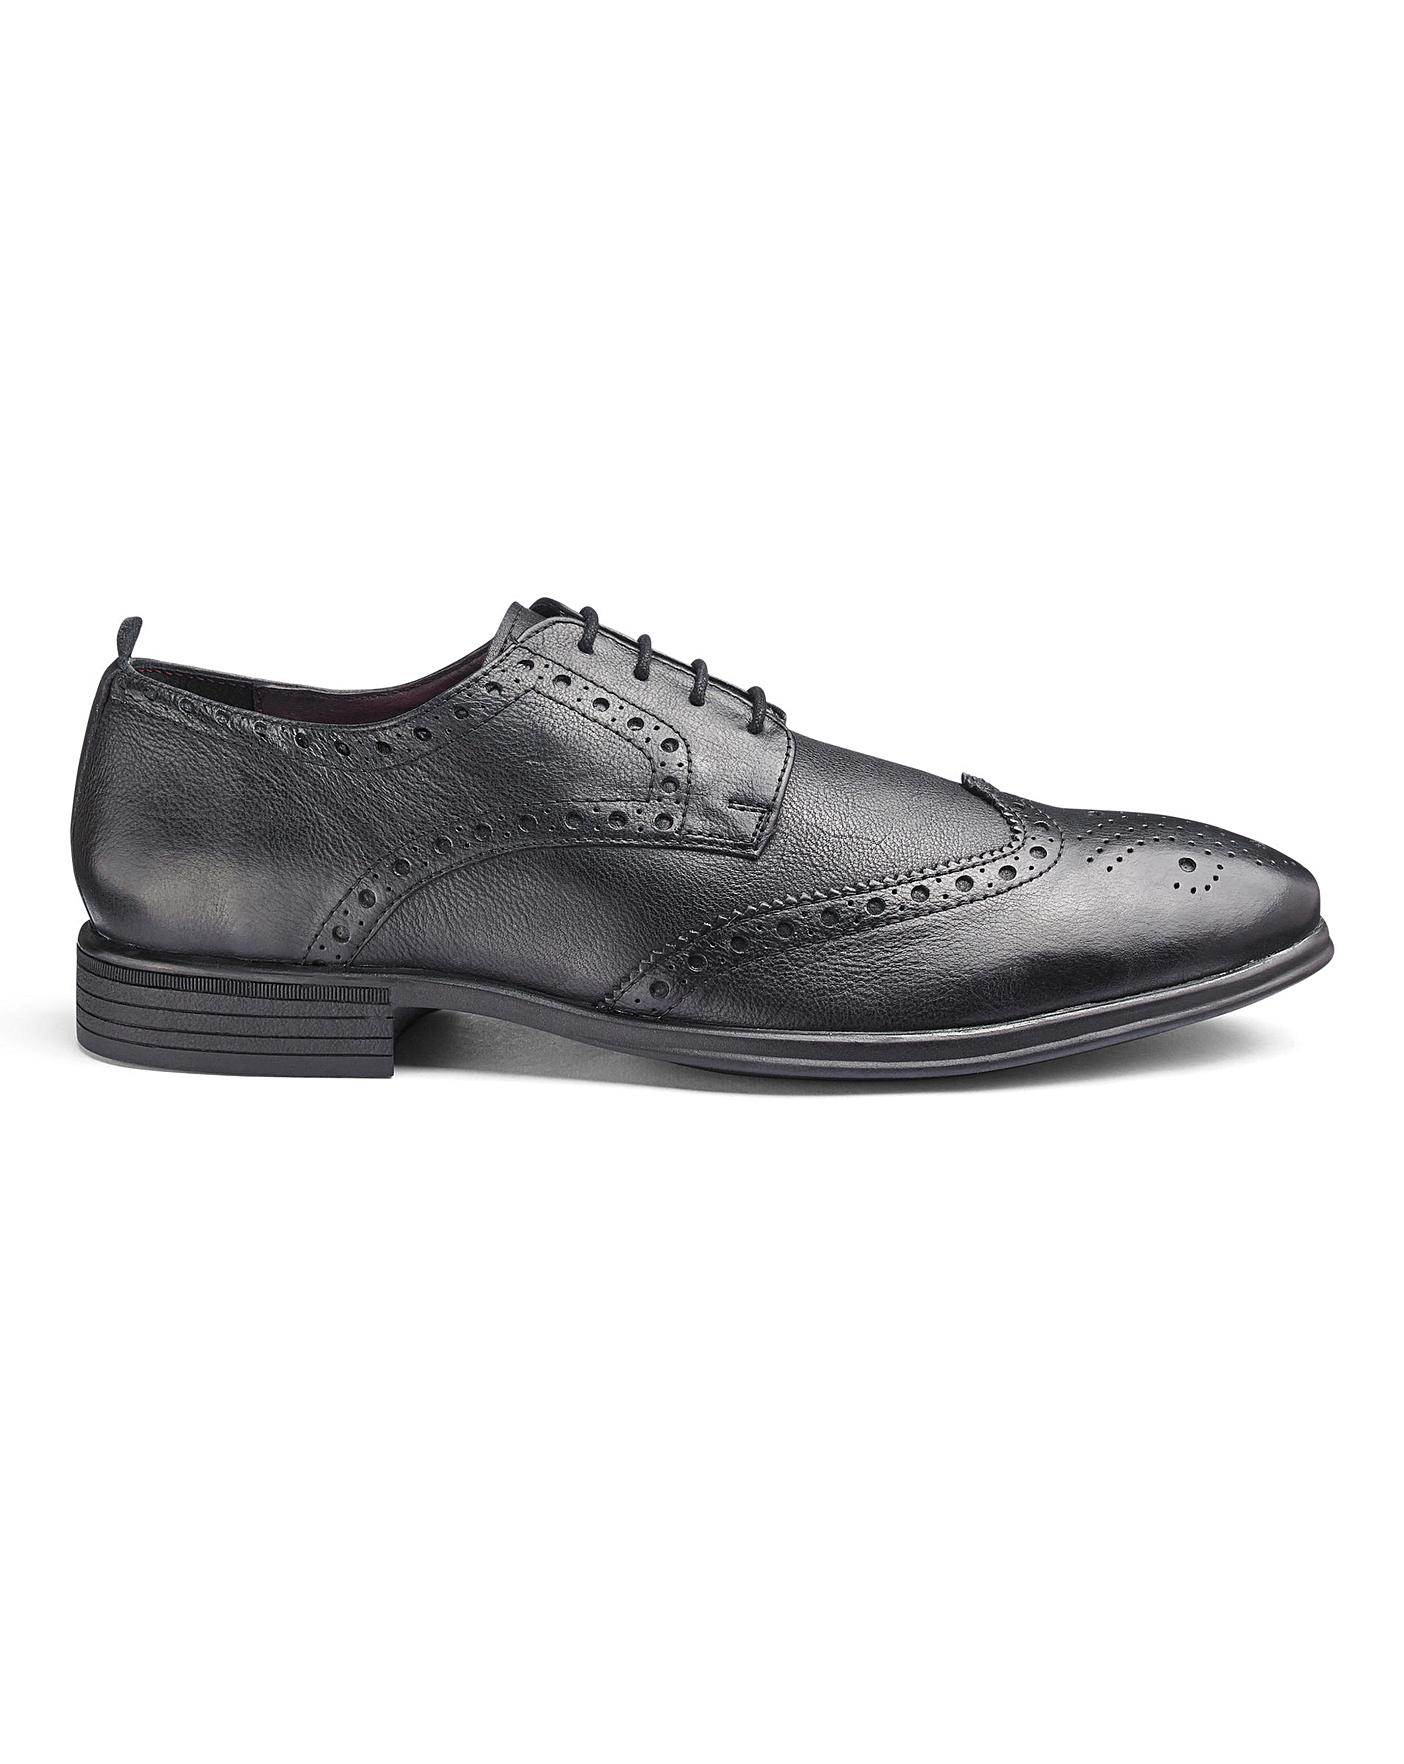 Leather Brogues Extra Wide Fit.